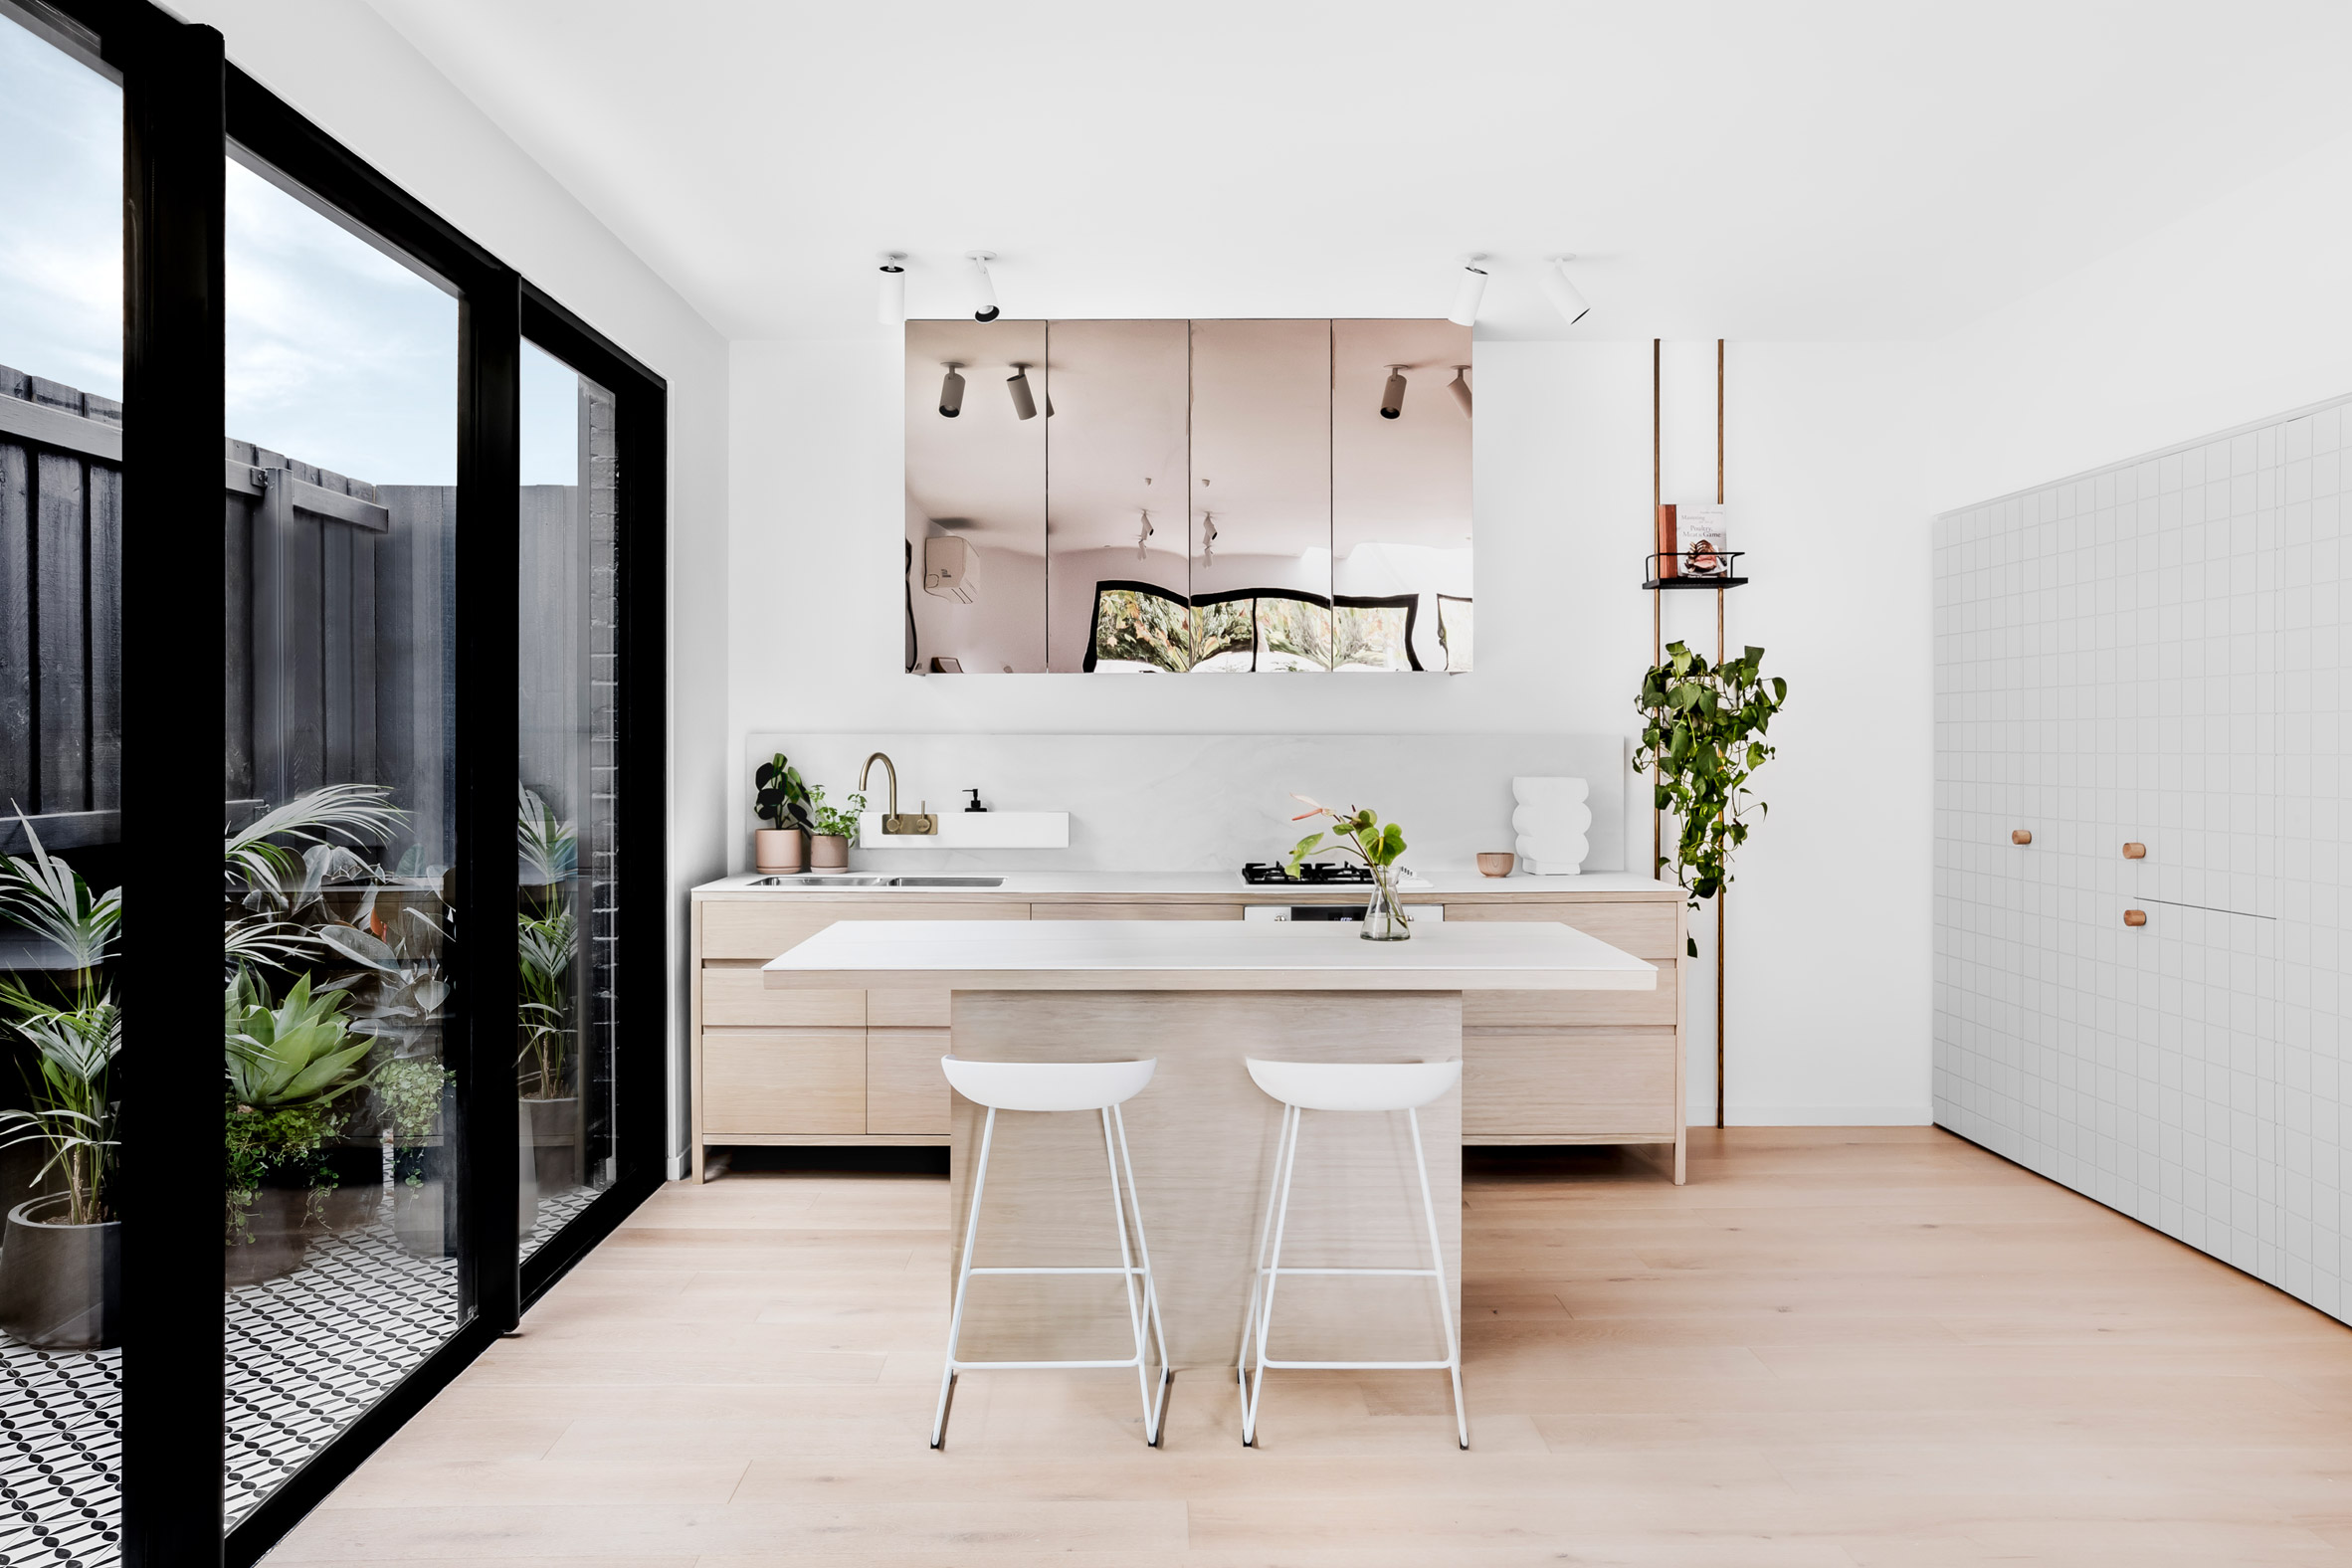 Interiors of Pine Ave townhouses by Cera Stribley Architects and The Stella Collective